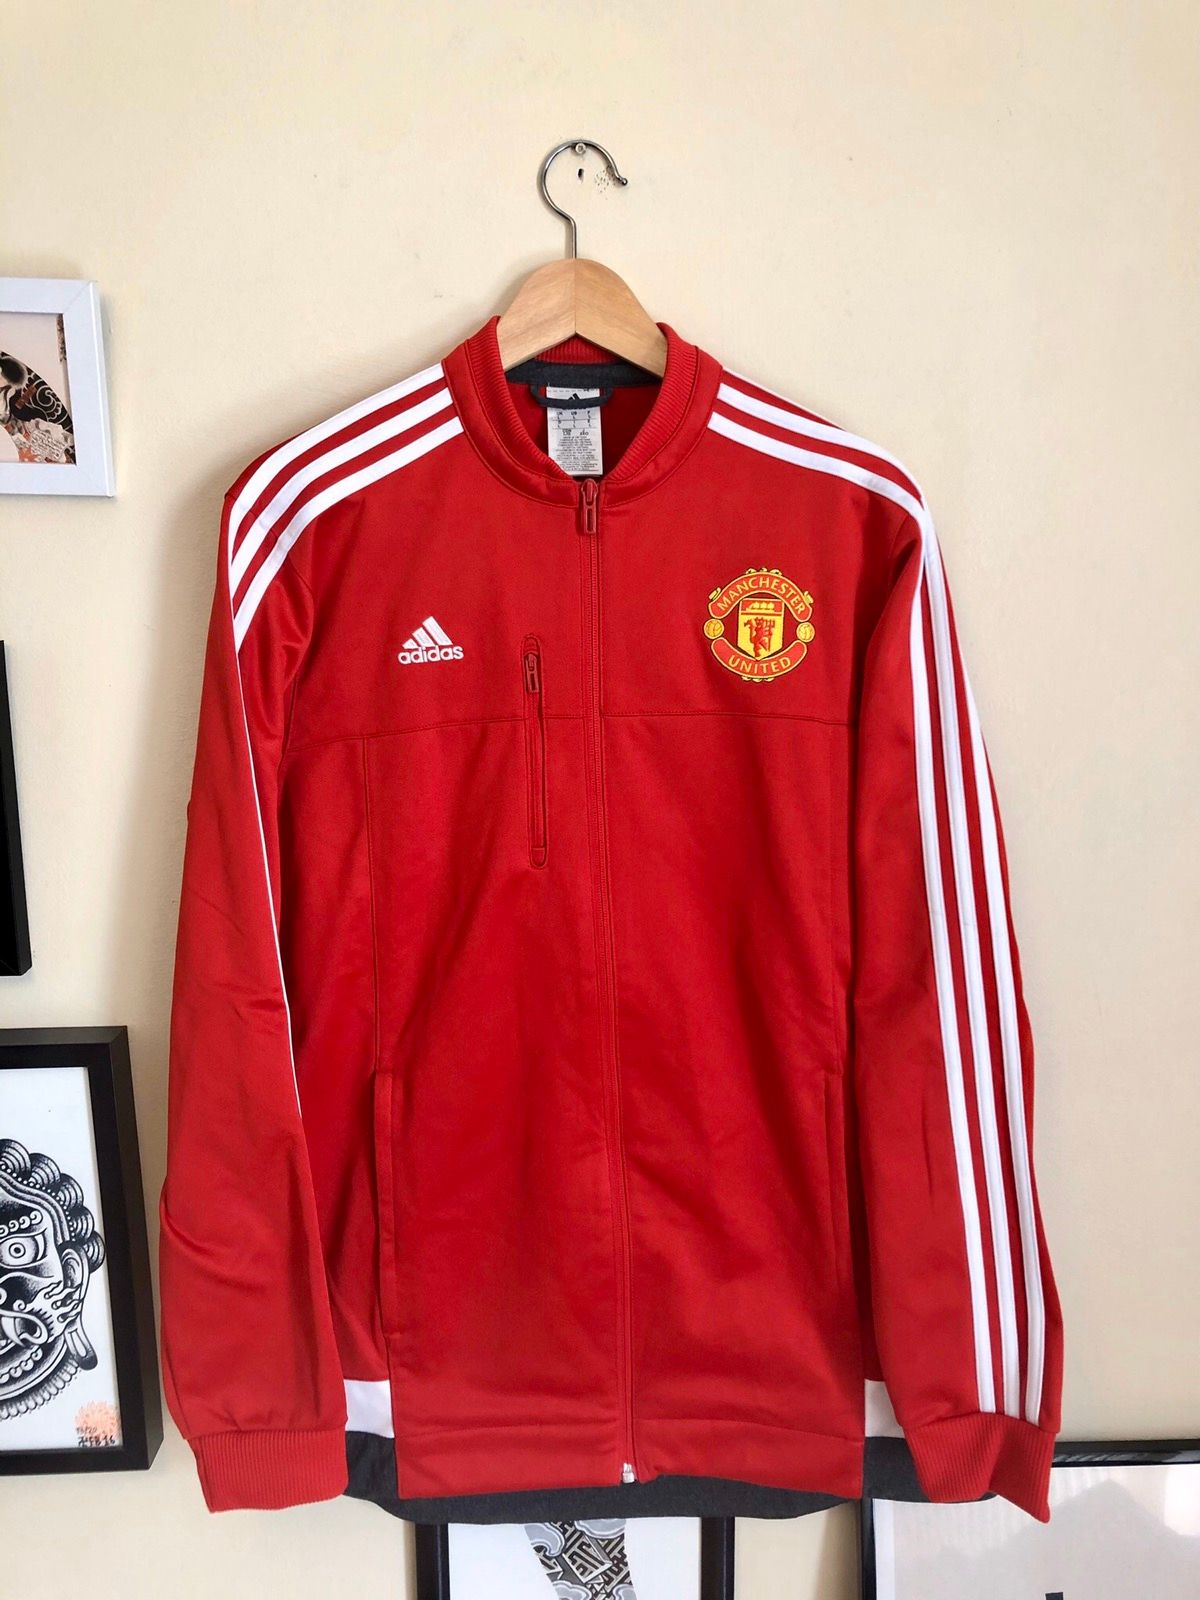 Adidas Adidas x Manchester United football track jacket Size US L / EU 52-54 / 3 - 1 Preview